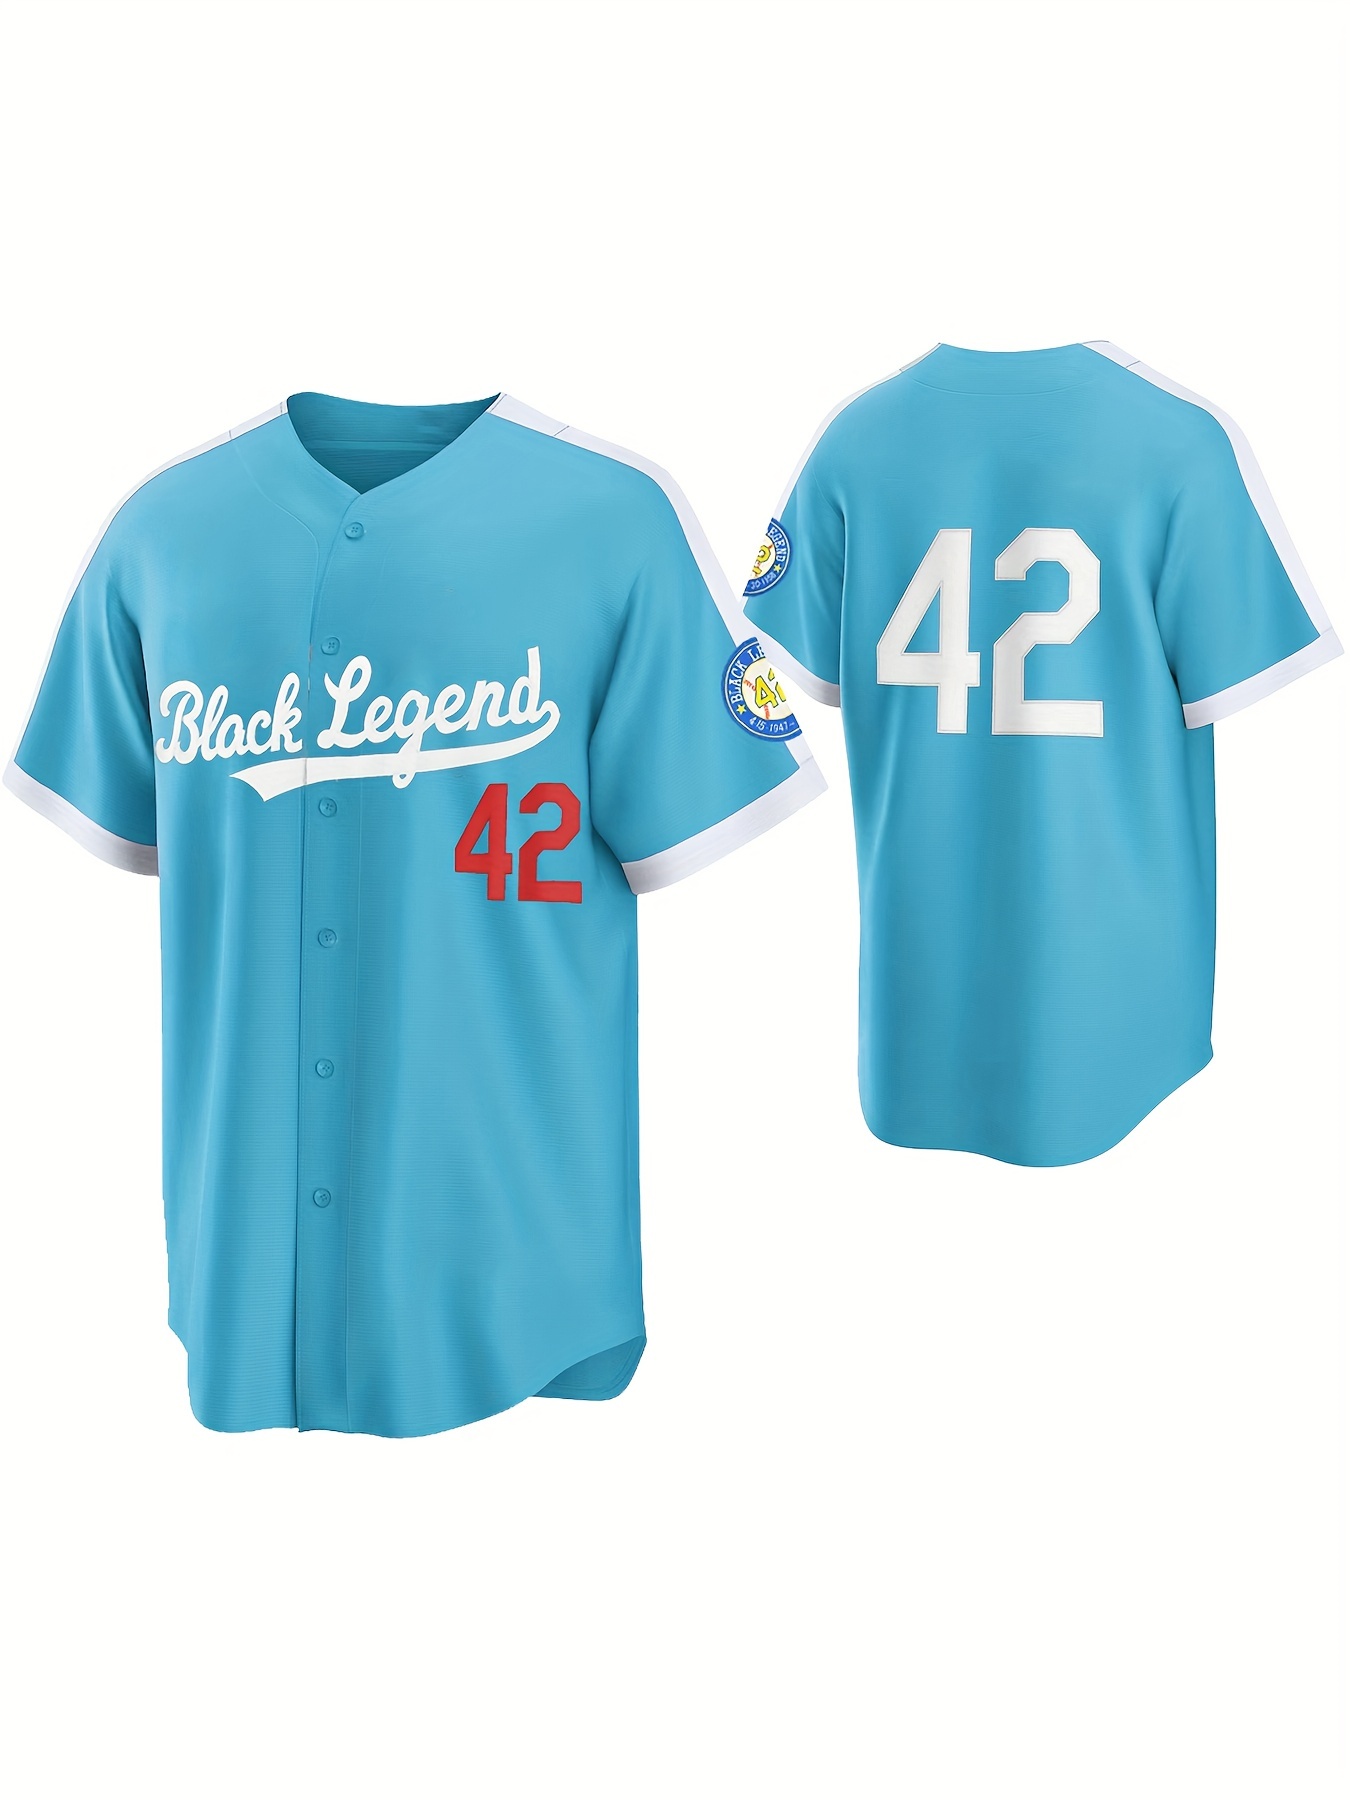 Men's Legend #824 Embroidered Baseball Jersey, Active Slightly Stretch Button Up Short Sleeve Uniform Baseball Shirt for Training Competition,Temu